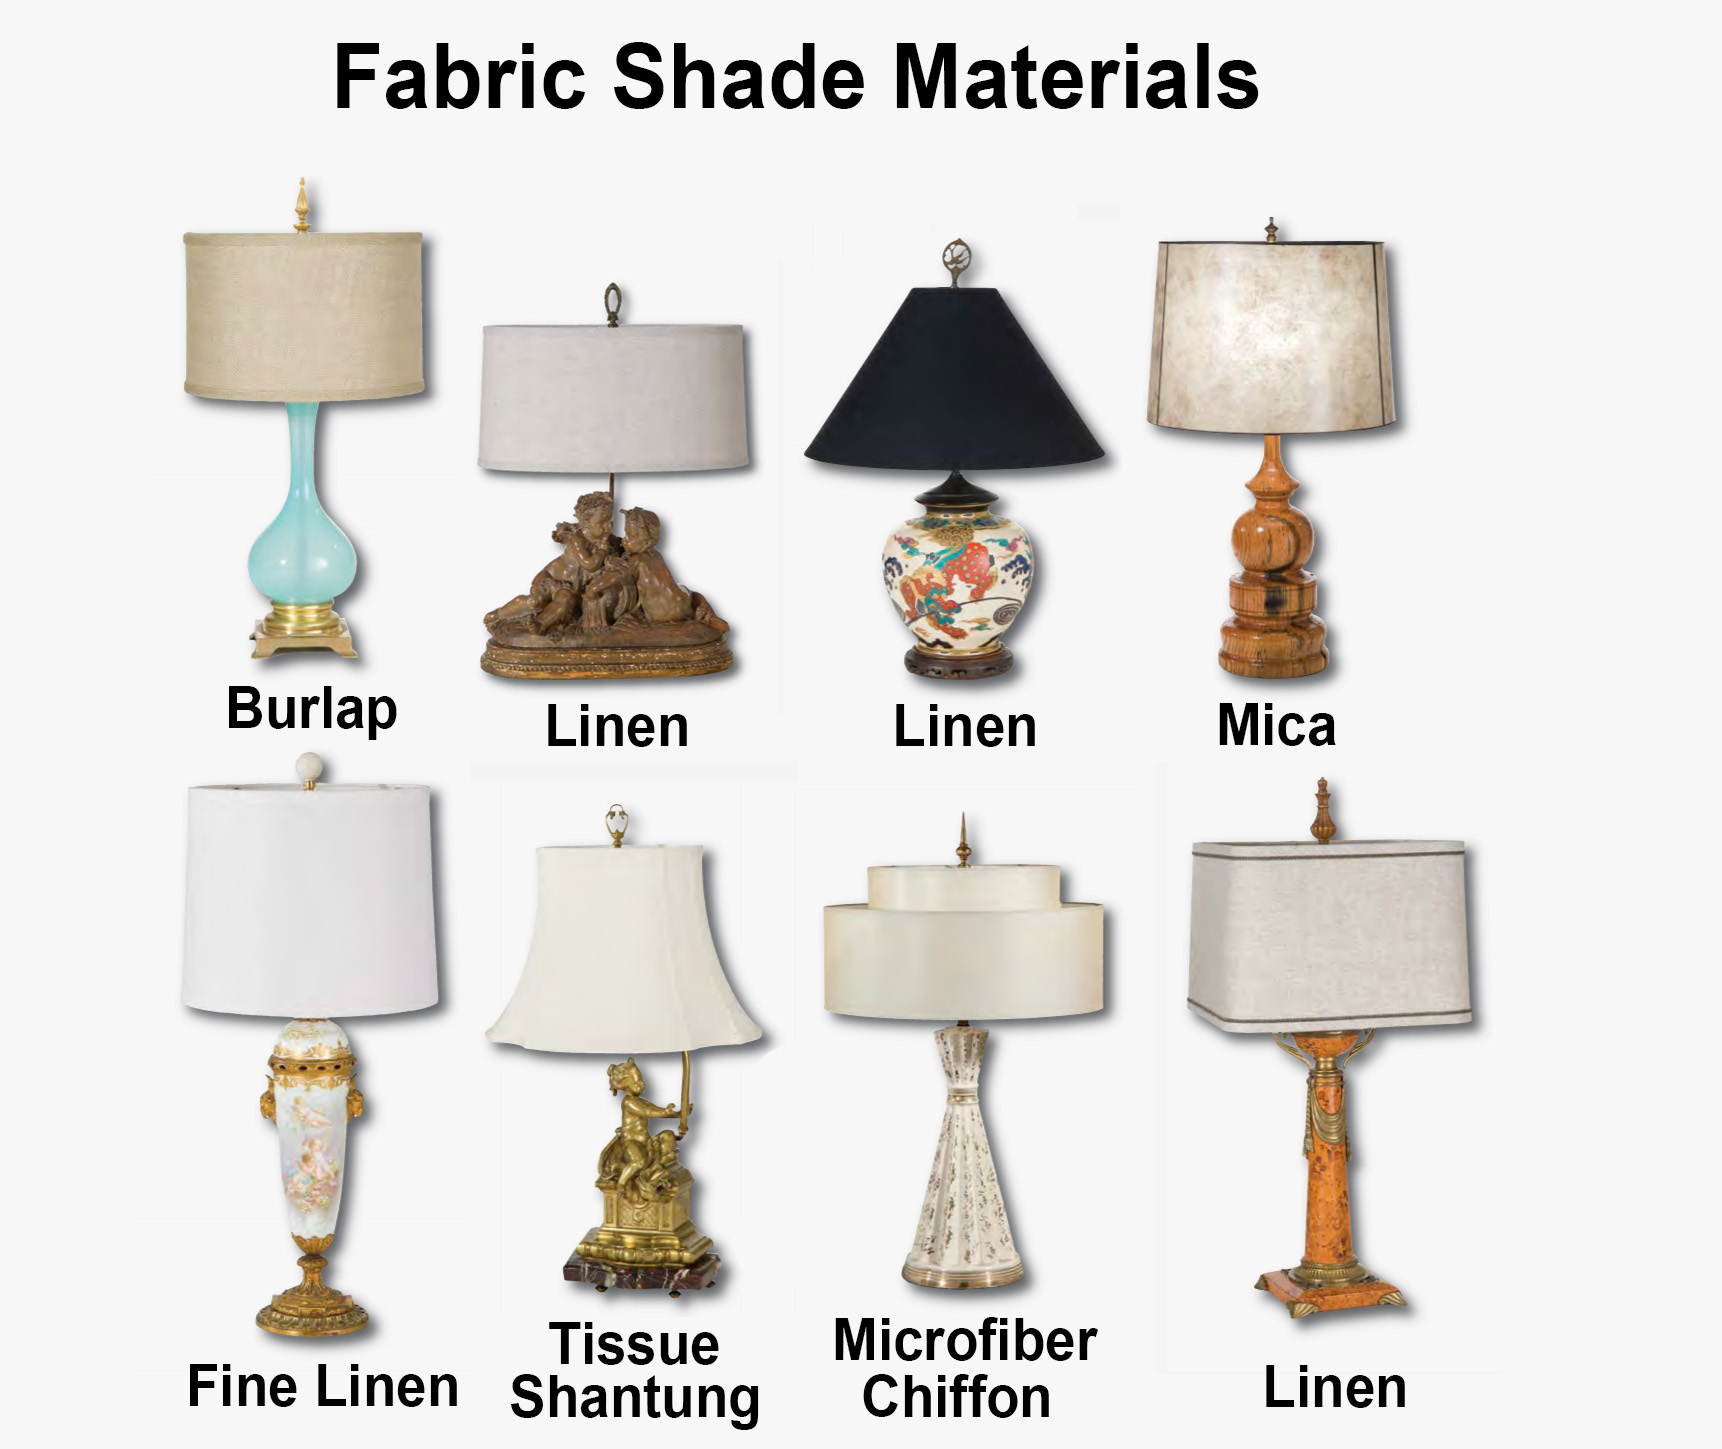 Understand the lampshade